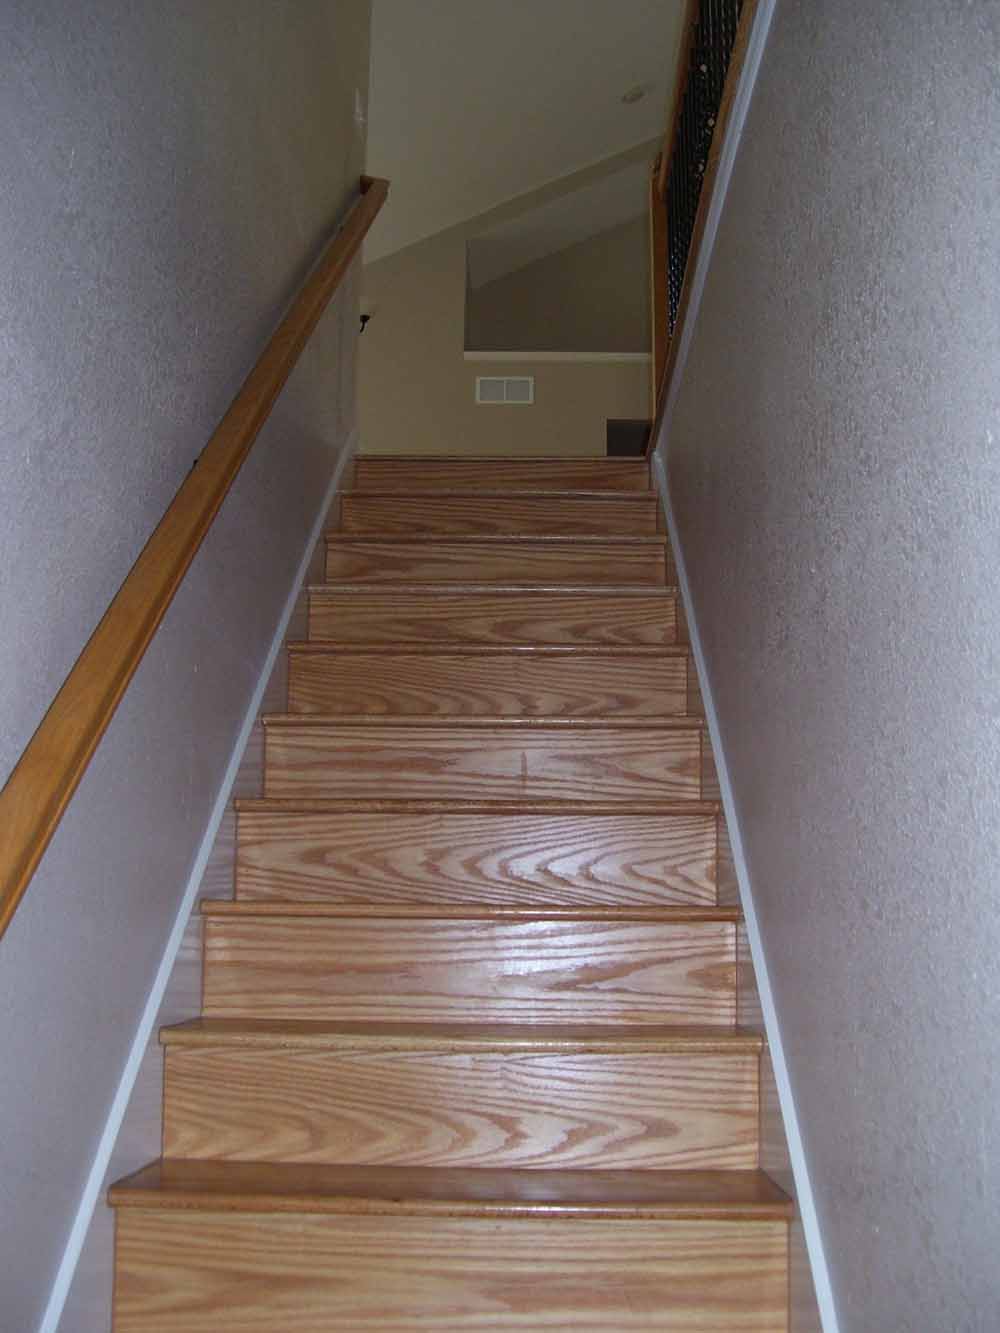 Stairs to walk out basement level